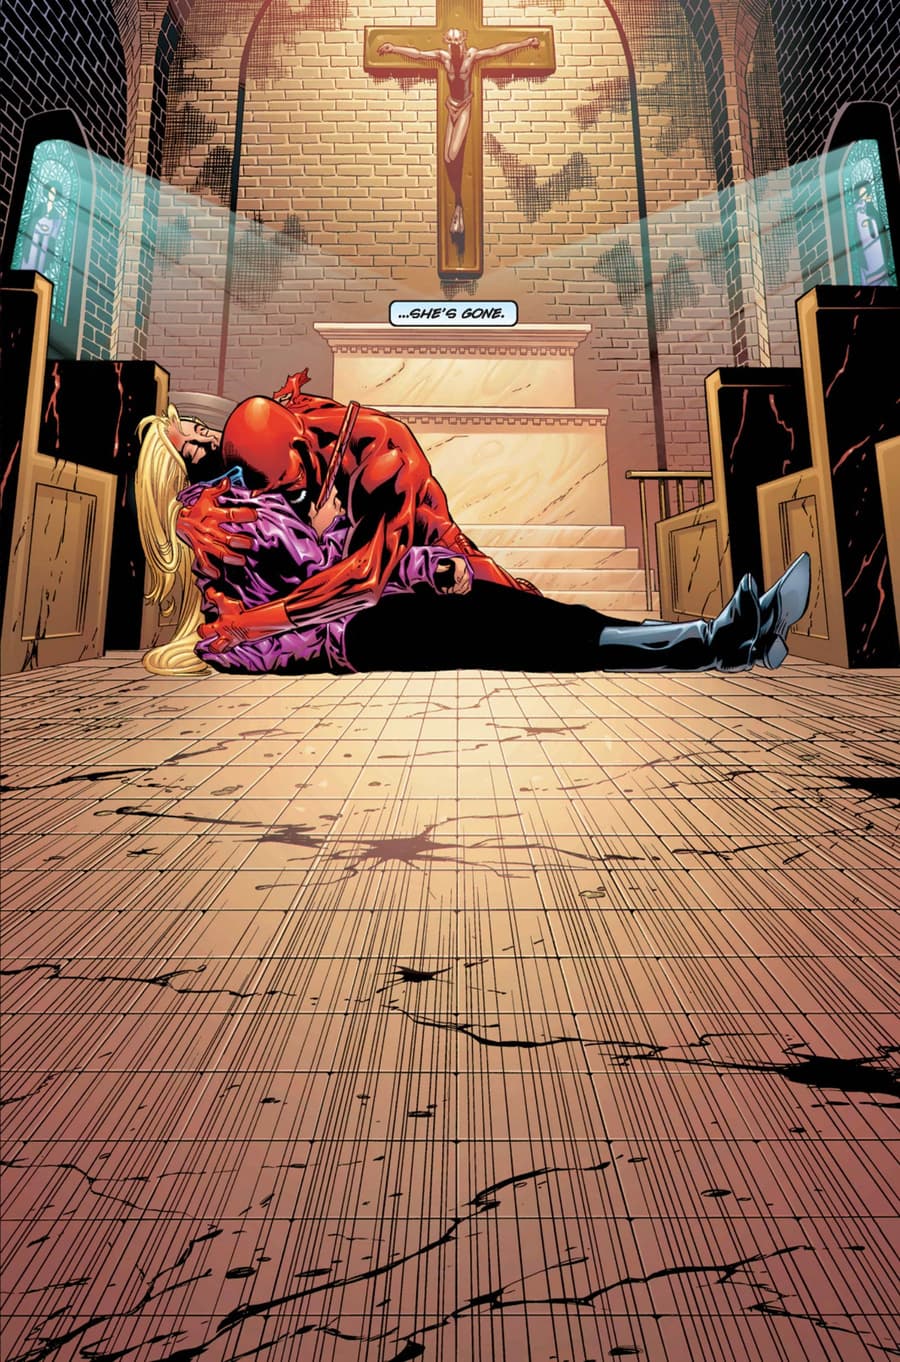 DAREDEVIL (1998) #5 page by Kevin Smith, Joe Quesada, and Jimmy Palmiotti